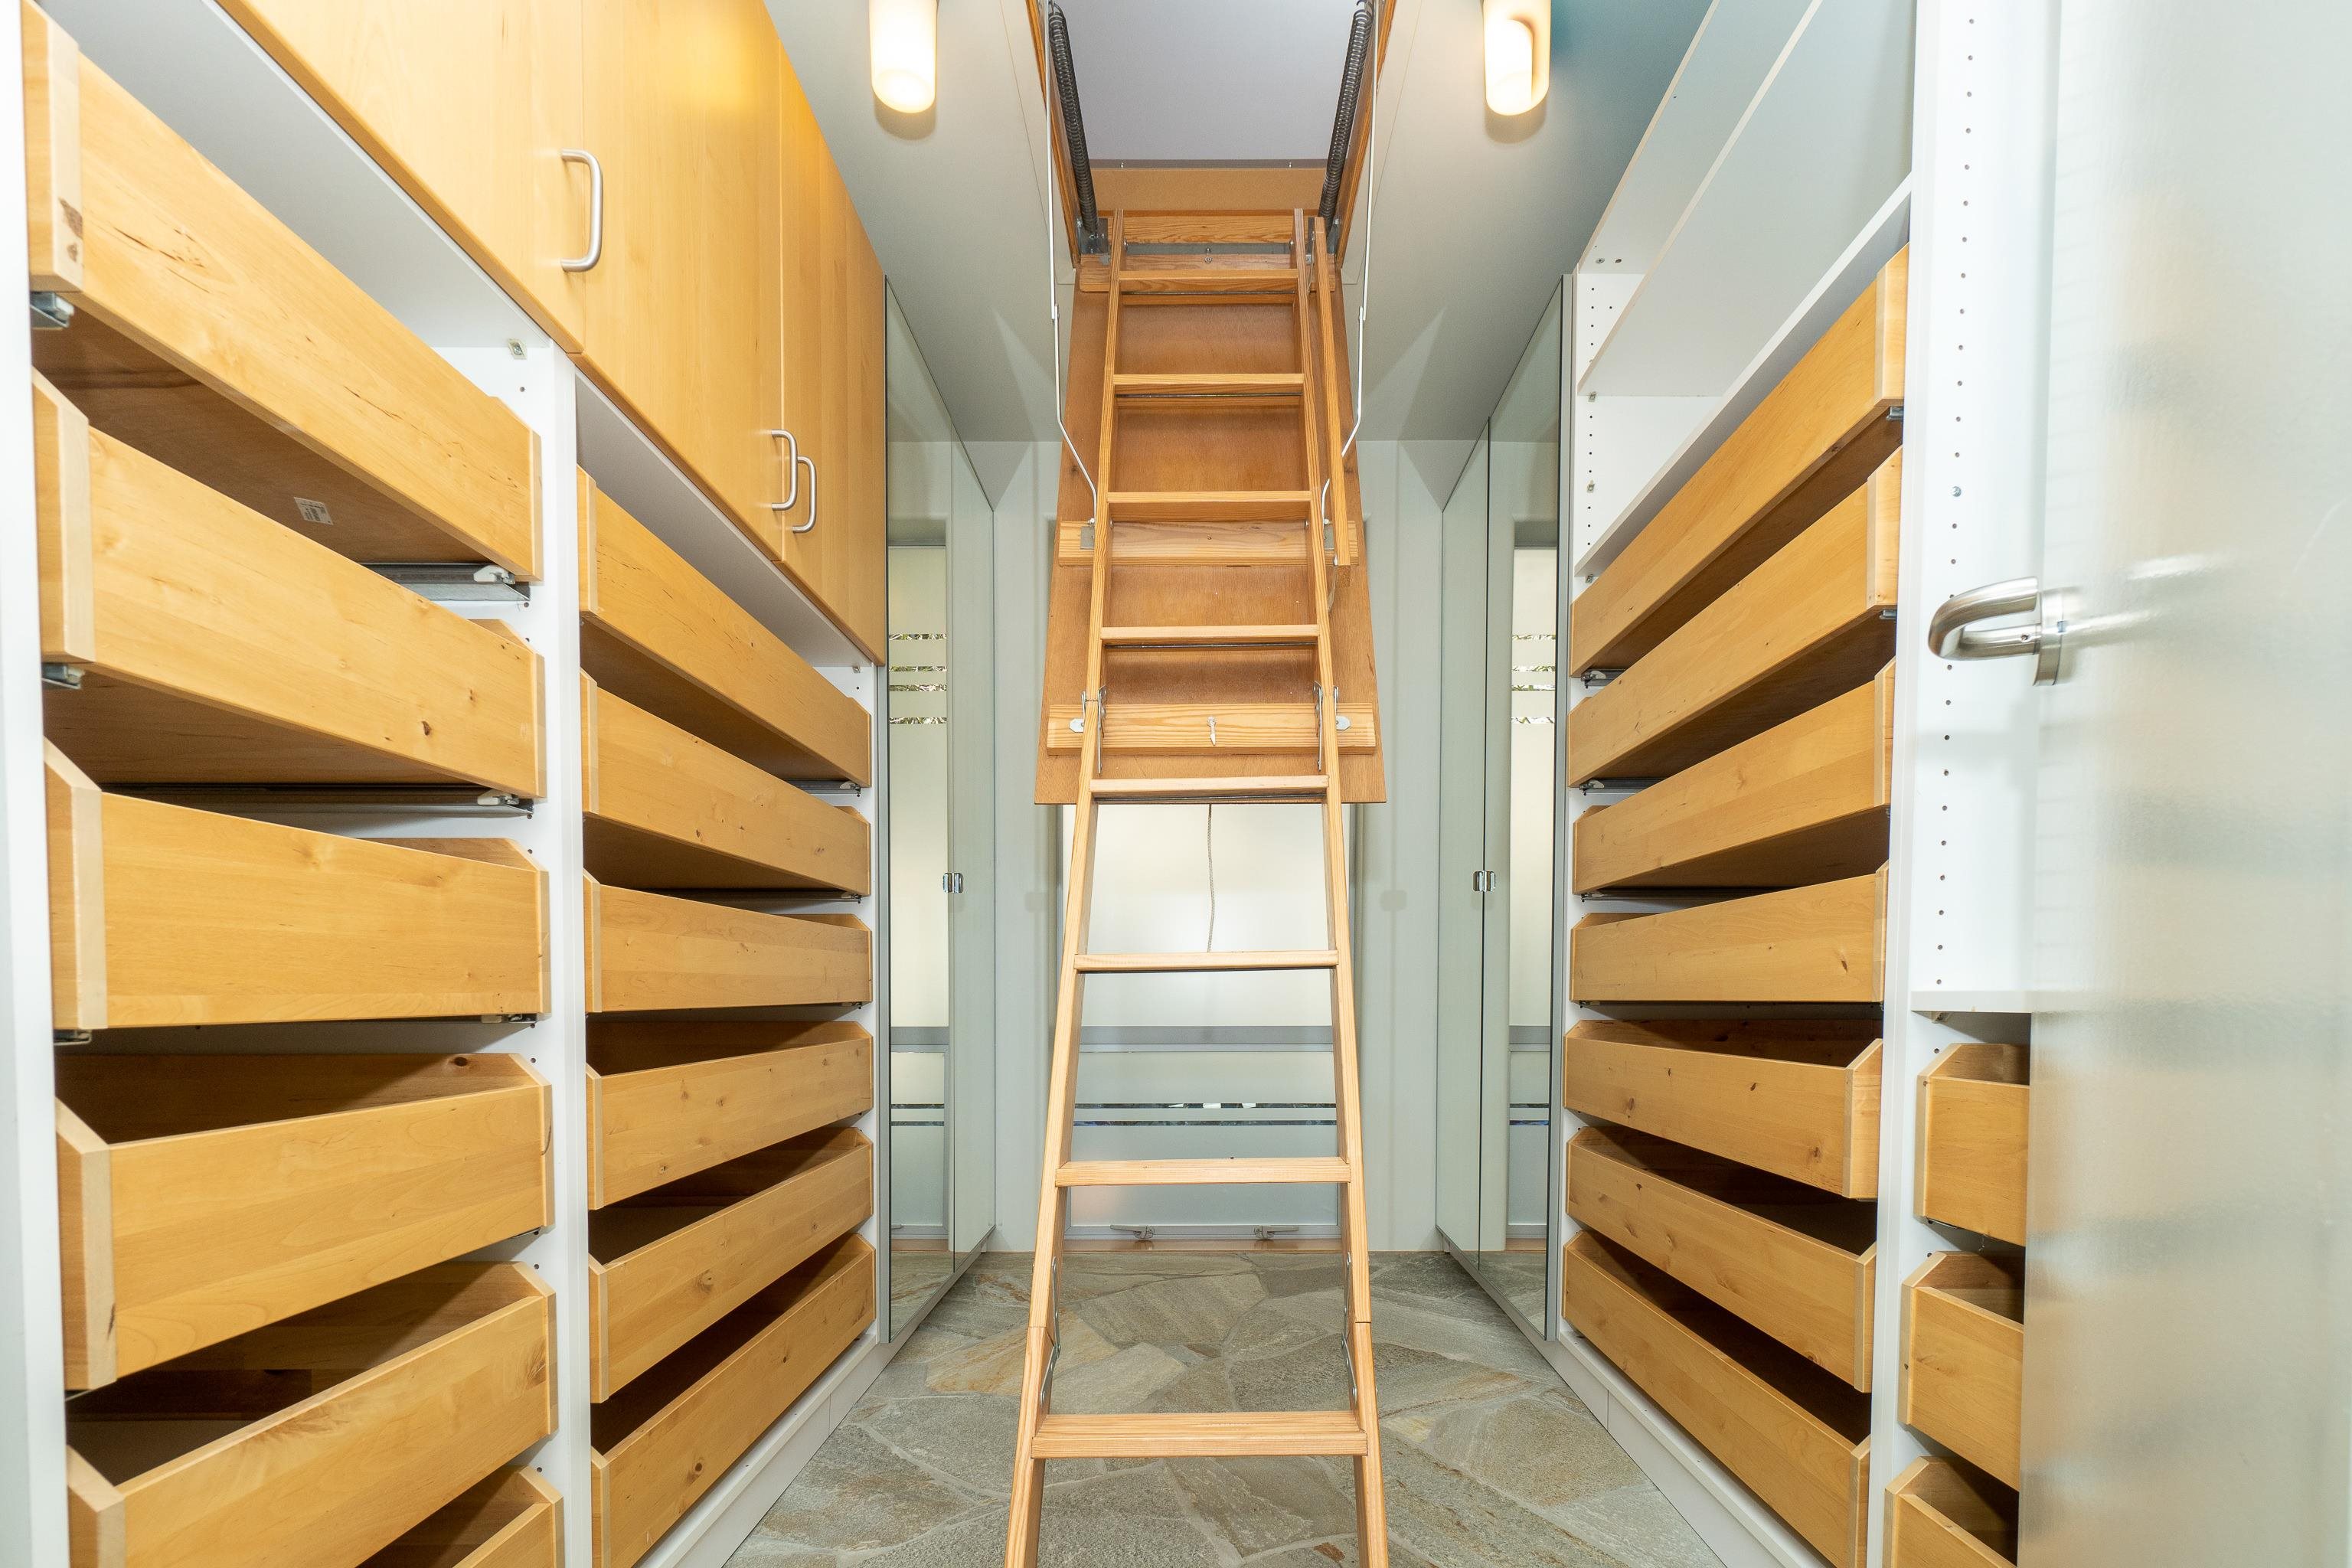 Custom walk in closet with laundry shoot and pull down attic stairs